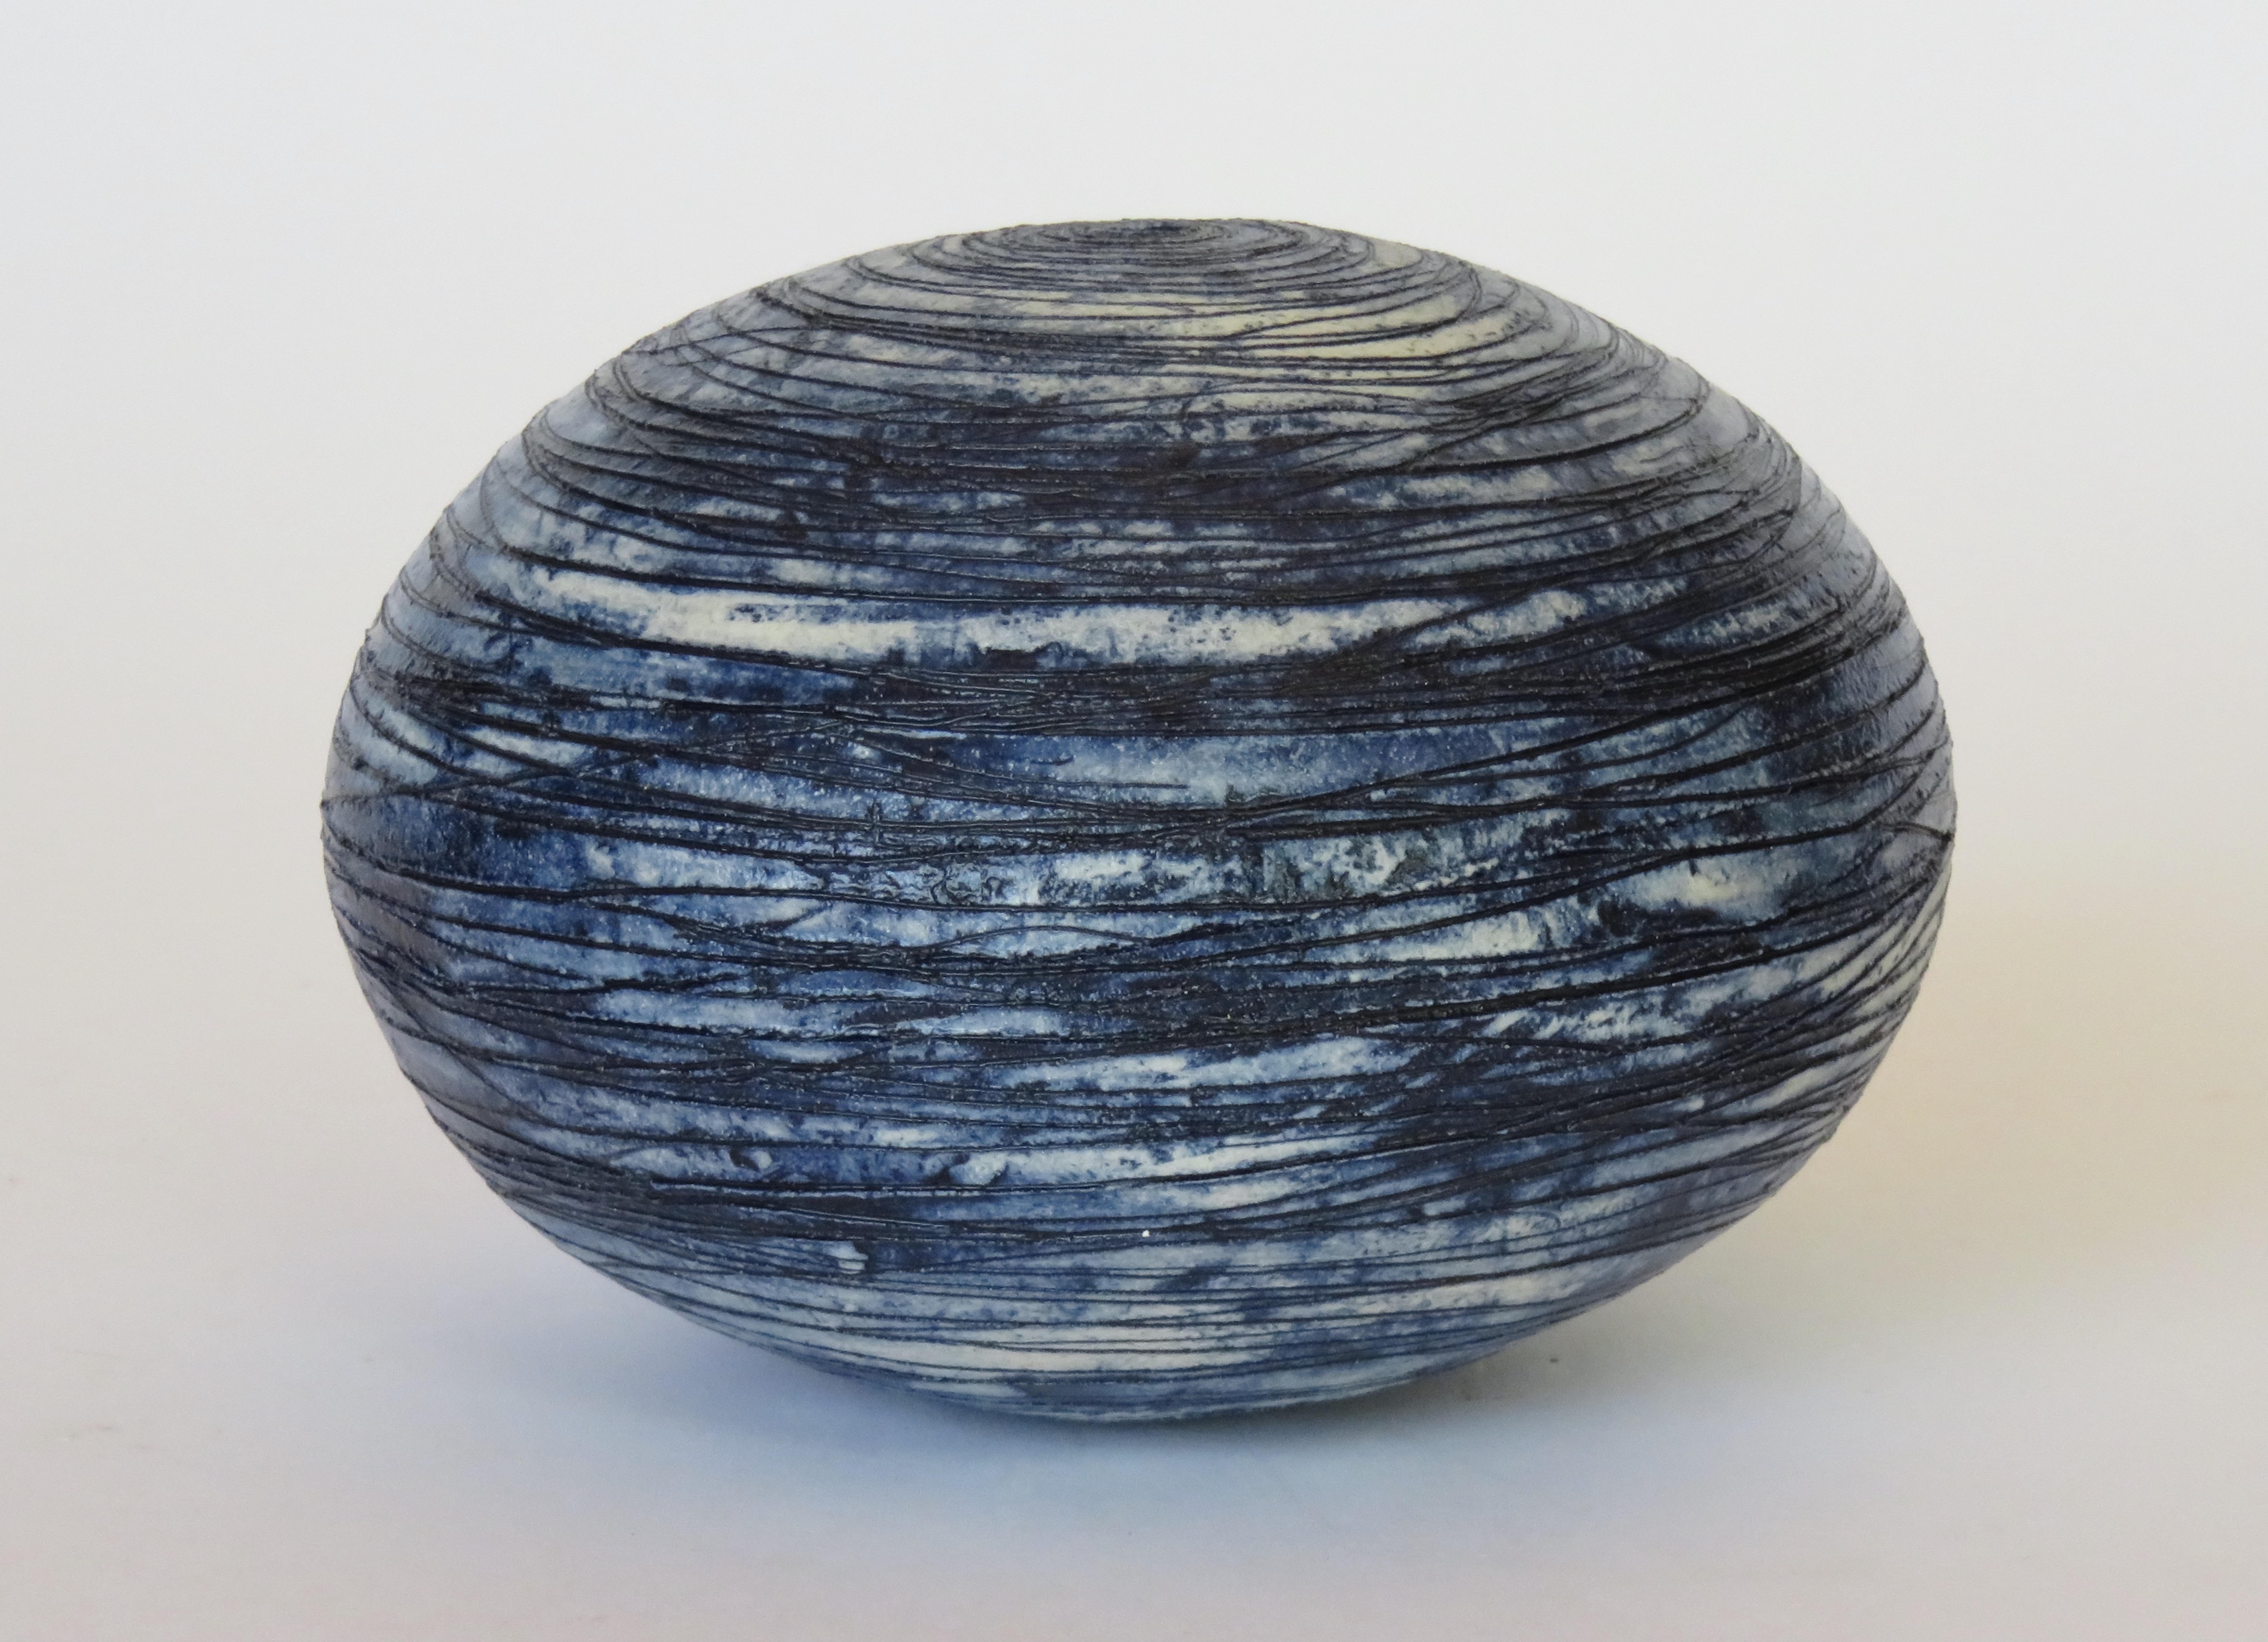 A hollow yet weighted sphere with an opening at top. It is hand carved with lines mimicking the rotation of a planet. This piece is for contemplation, meditation, to let your thoughts come and go. Or for a dried flower. Pairs beautifully with